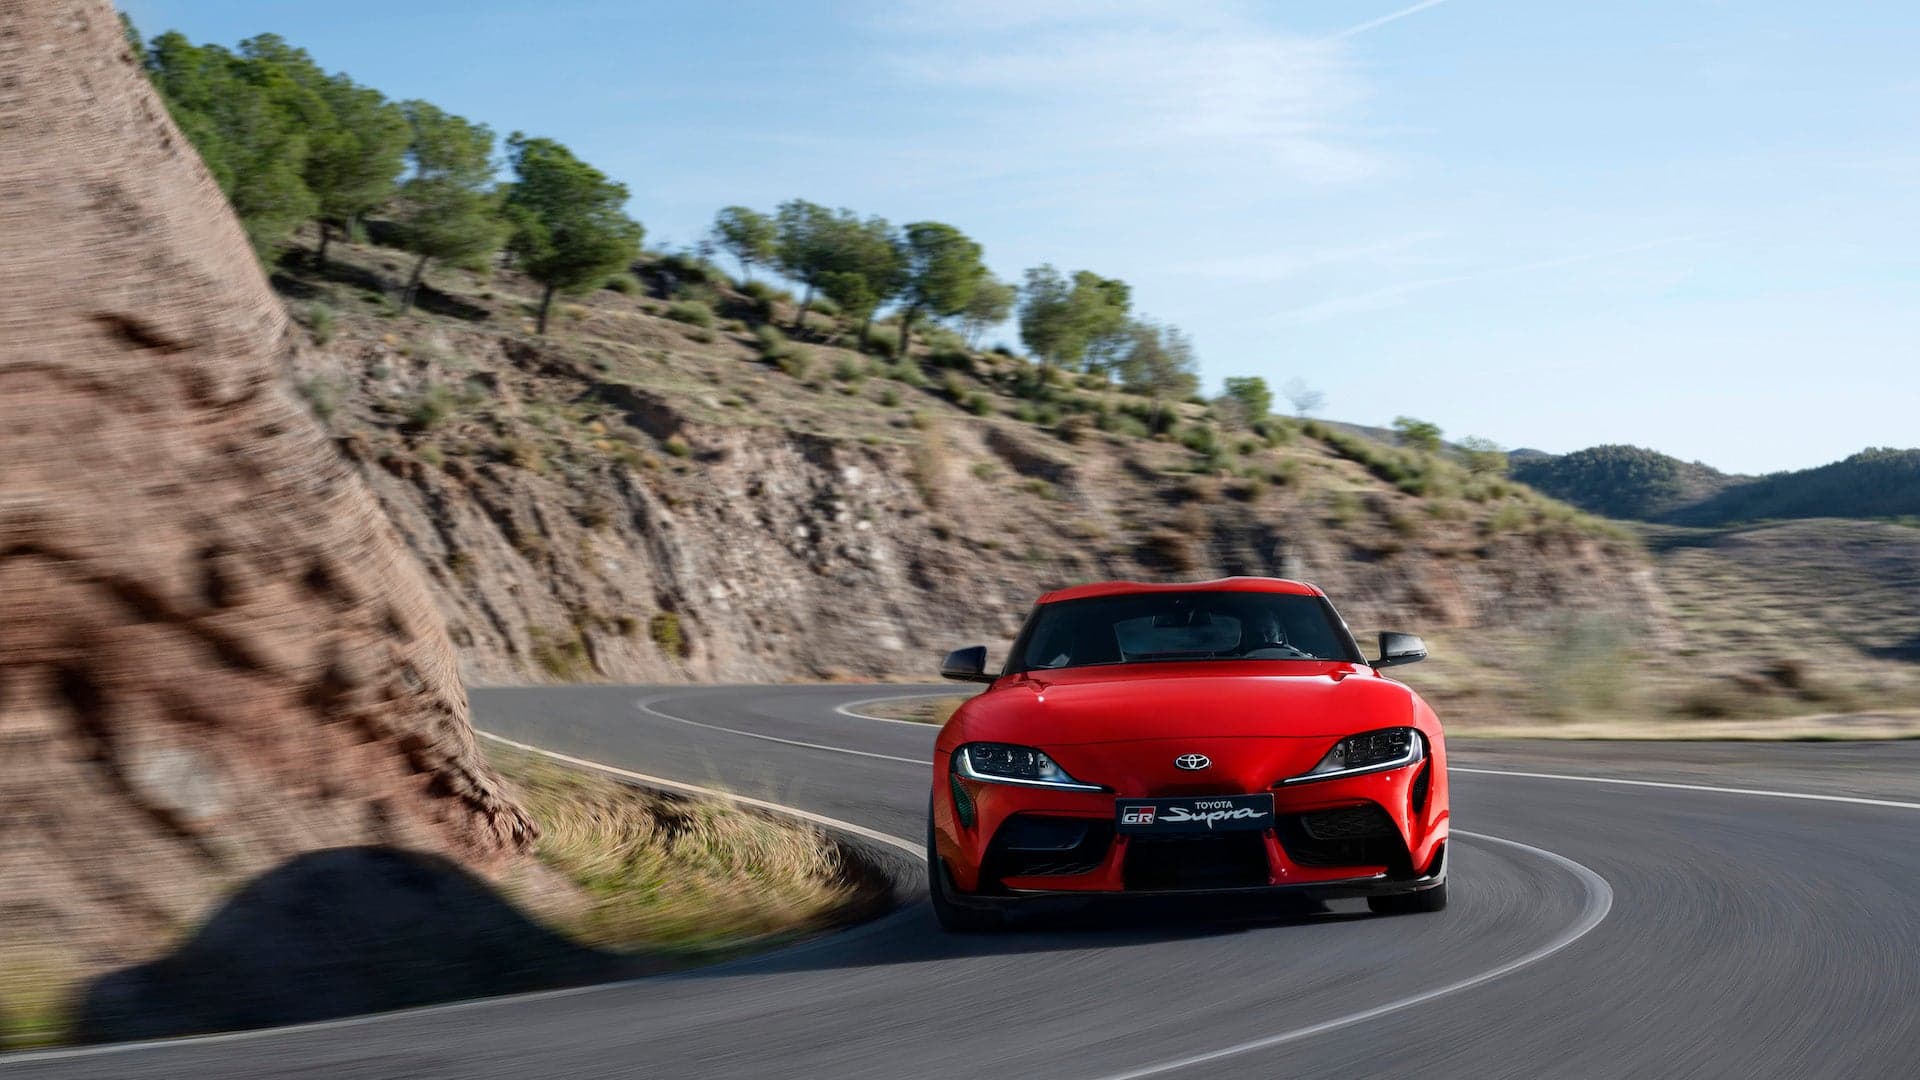 Price of 2020 Toyota Supra Would’ve Hit Six-Figure Mark Without BMW’s R&D Help